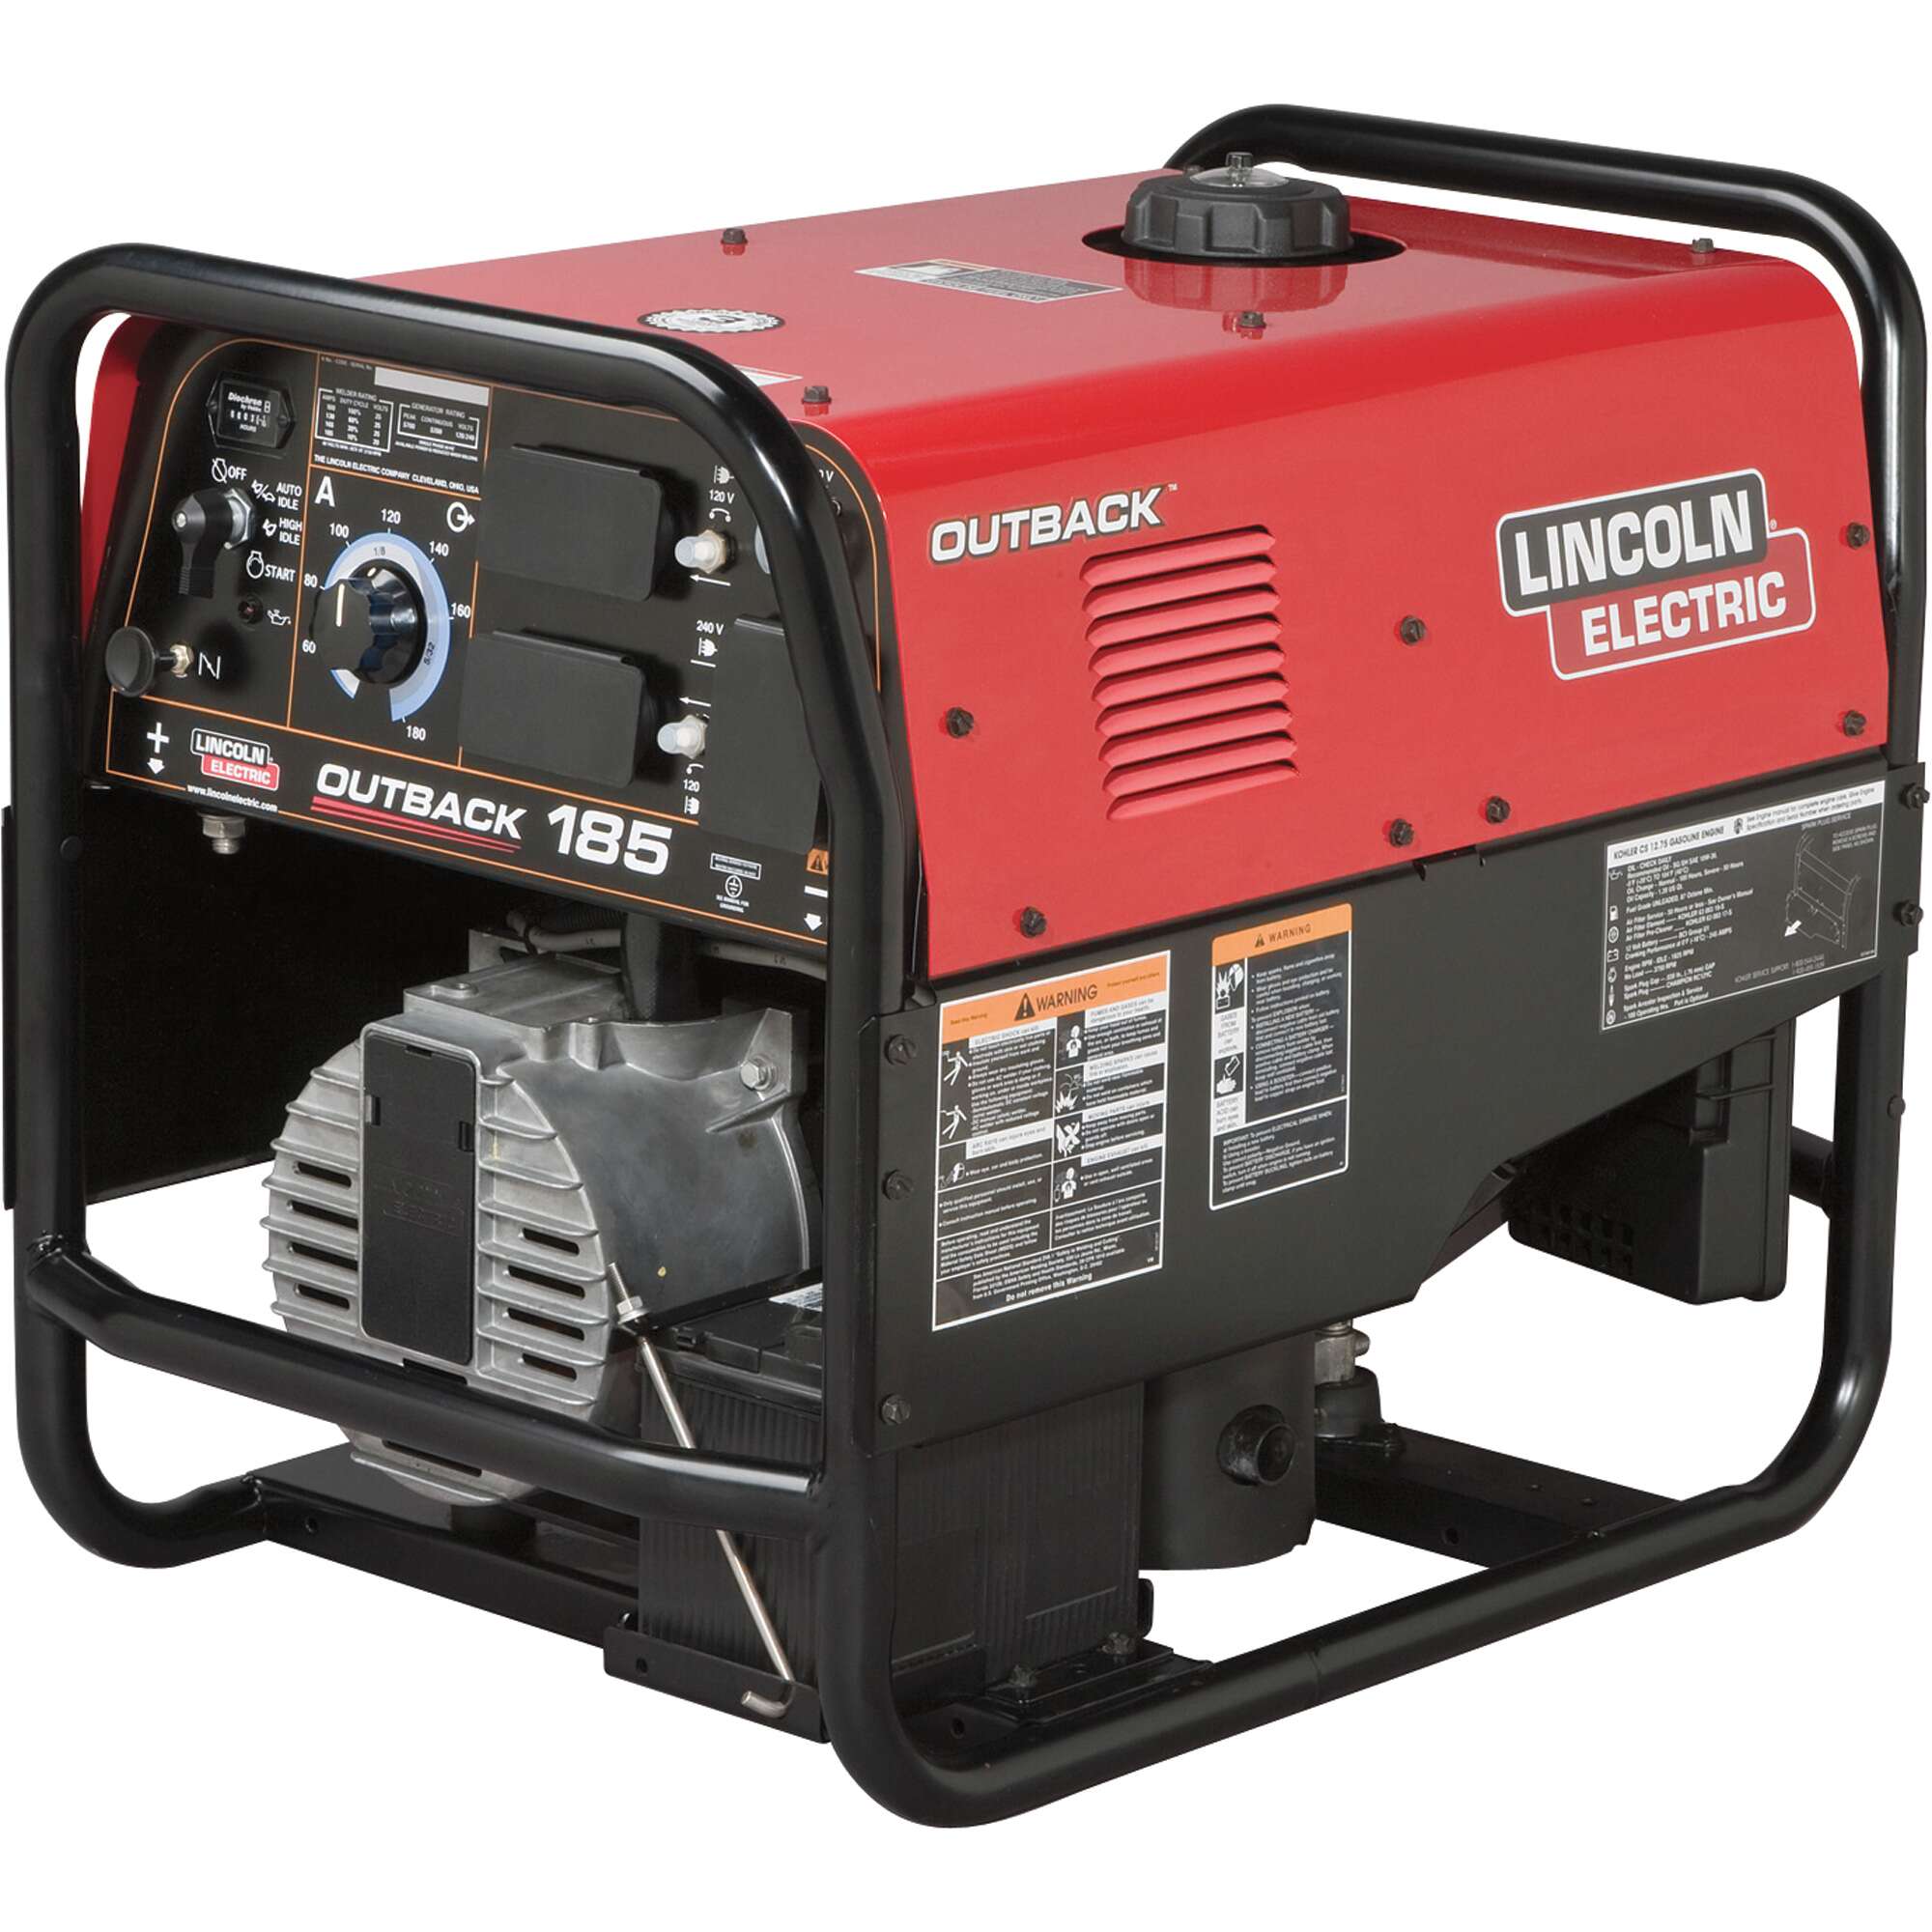 Lincoln Electric Ranger 250 GXT MultiProcess Welder Generator with 624CC Kohler Gas Engine and Electric Start 50 250 Amp DC AC Output 10000 Watt AC Power